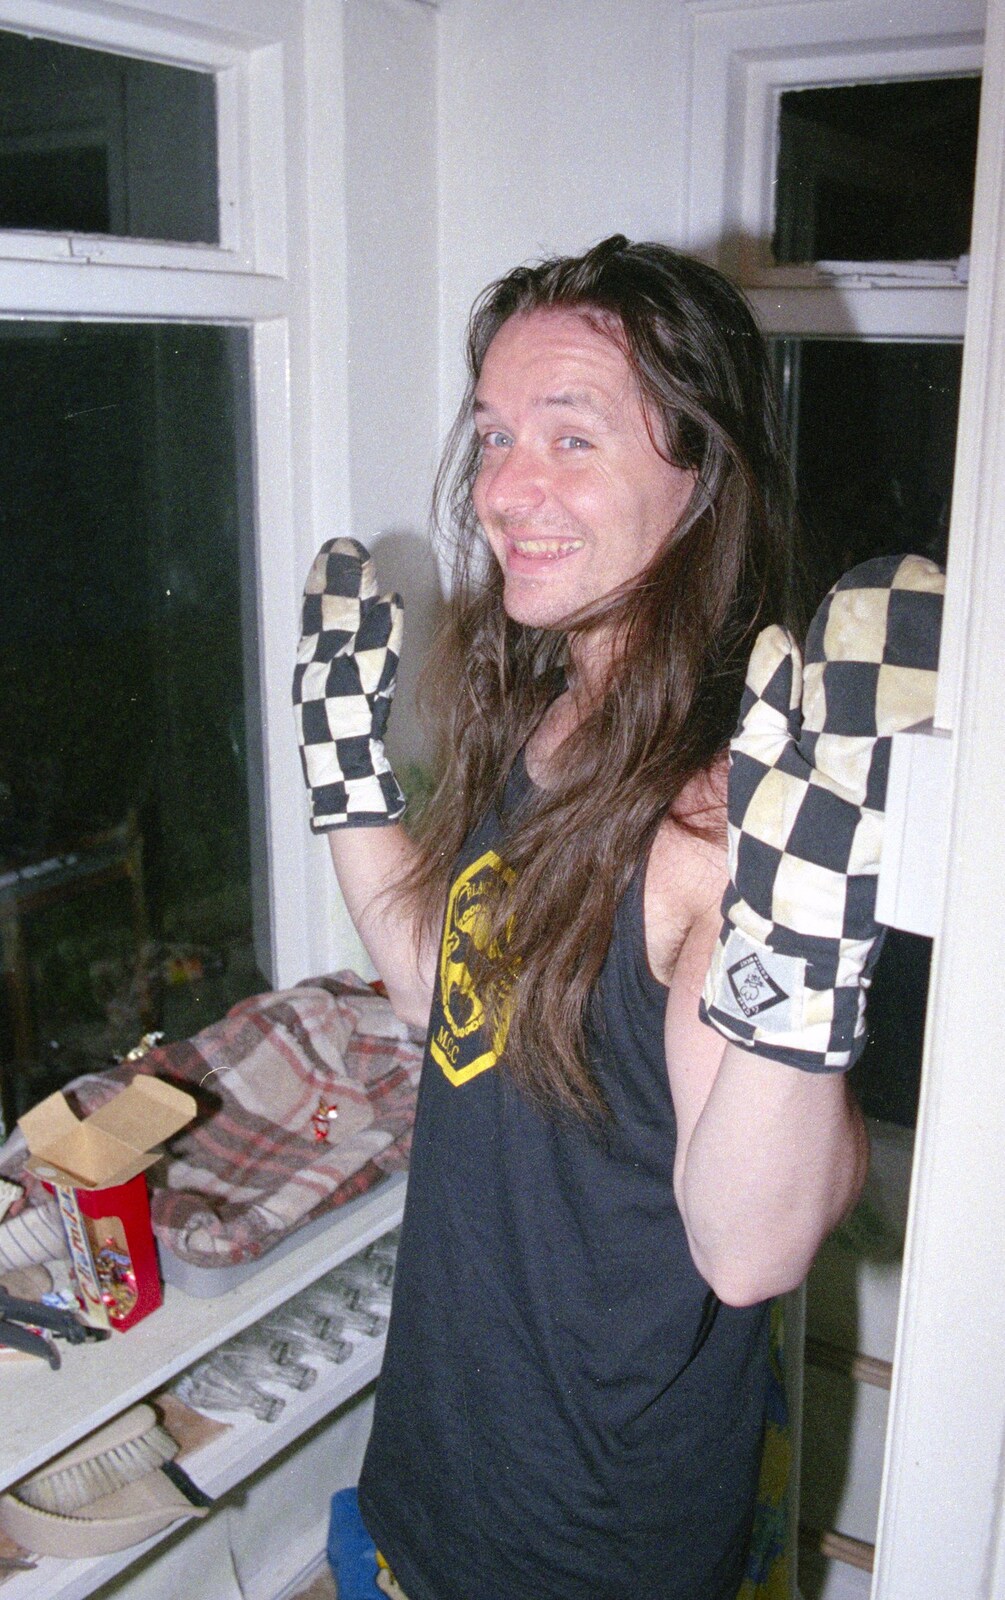 Fenton Garret with chequered oven gloves from A Mortlock Barbeque and a CISU Party, Suffolk - 11th July 1999